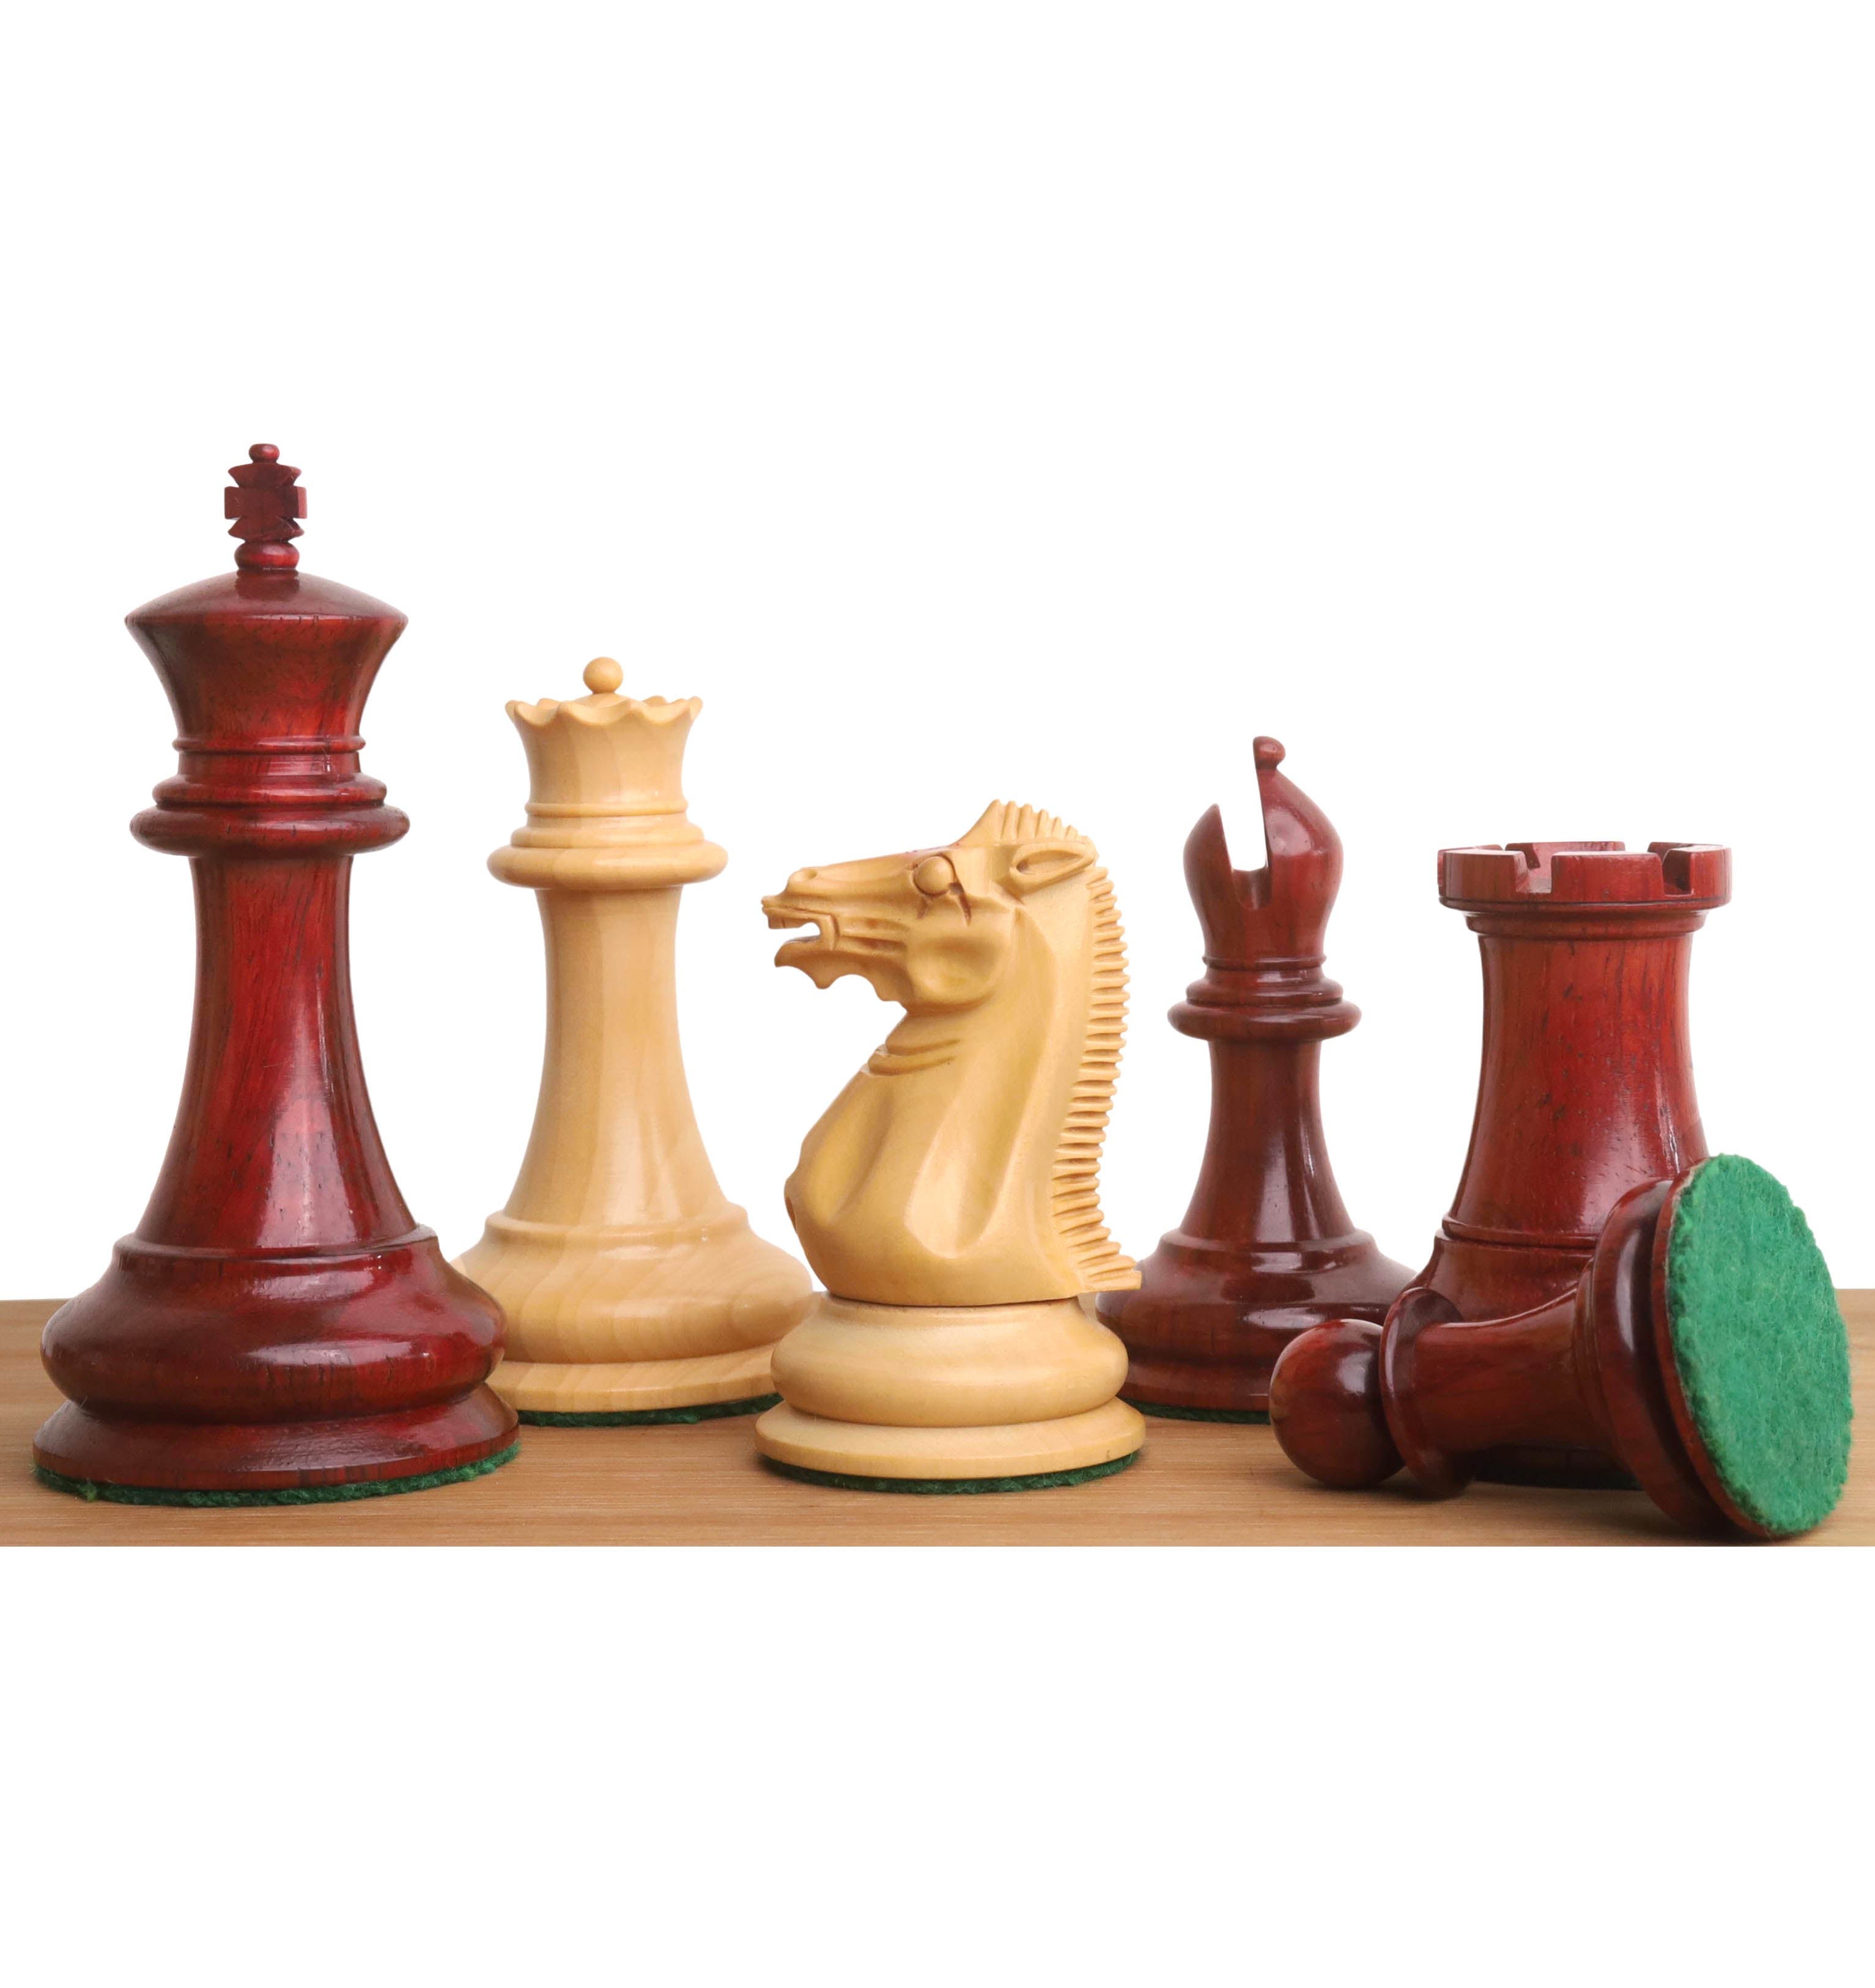 1849 Jacques Cook Staunton Collectors Chess Set- Chess Pieces Only- Bud Rosewood - 3.75"